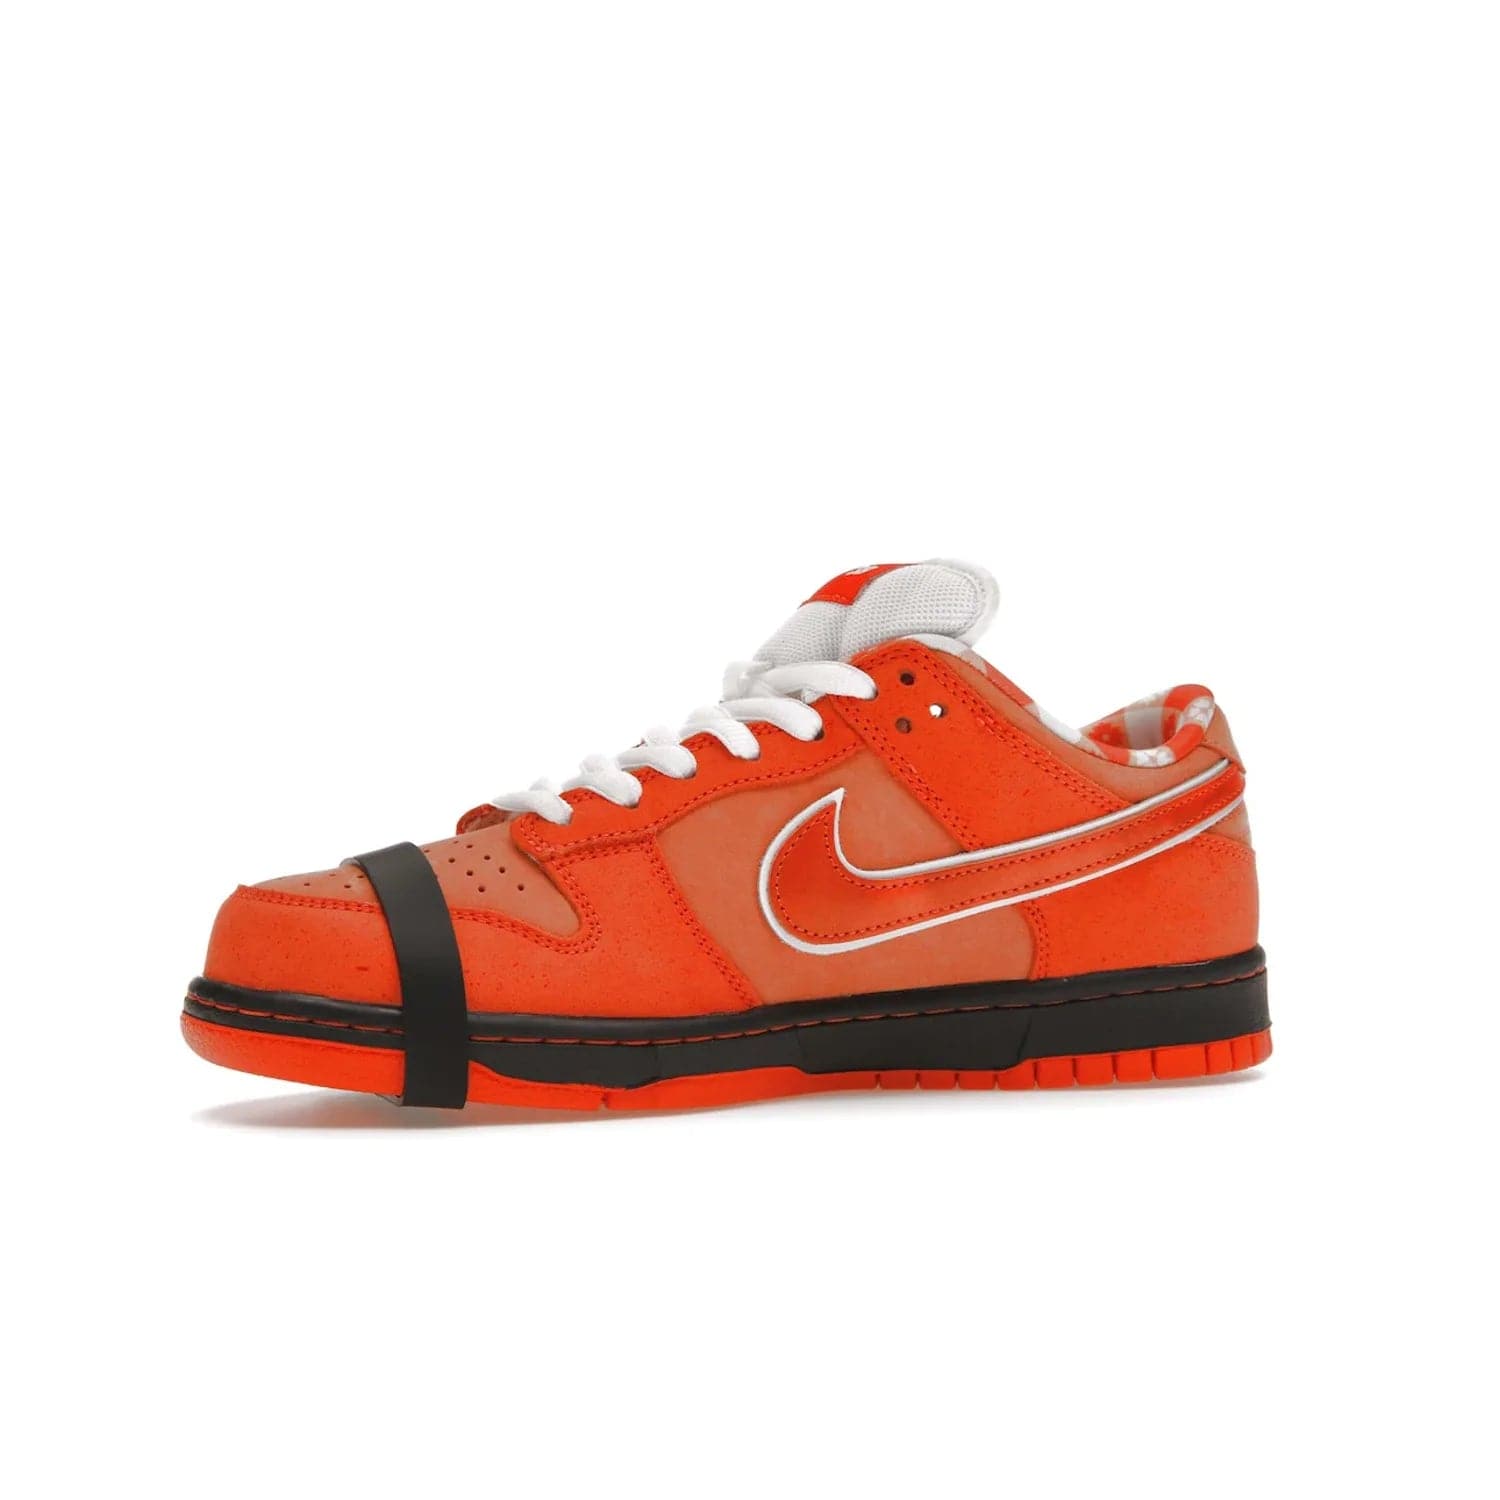 Nike SB Dunk Low Concepts Orange Lobster - Image 17 - Only at www.BallersClubKickz.com - Make a statement with the Nike SB Dunk Low Concepts Orange Lobster. Variety of orange hues, nubuck upper, bib-inspired lining & rubber outsole create bold look & comfortable blend of style. Available December 20th, 2022.